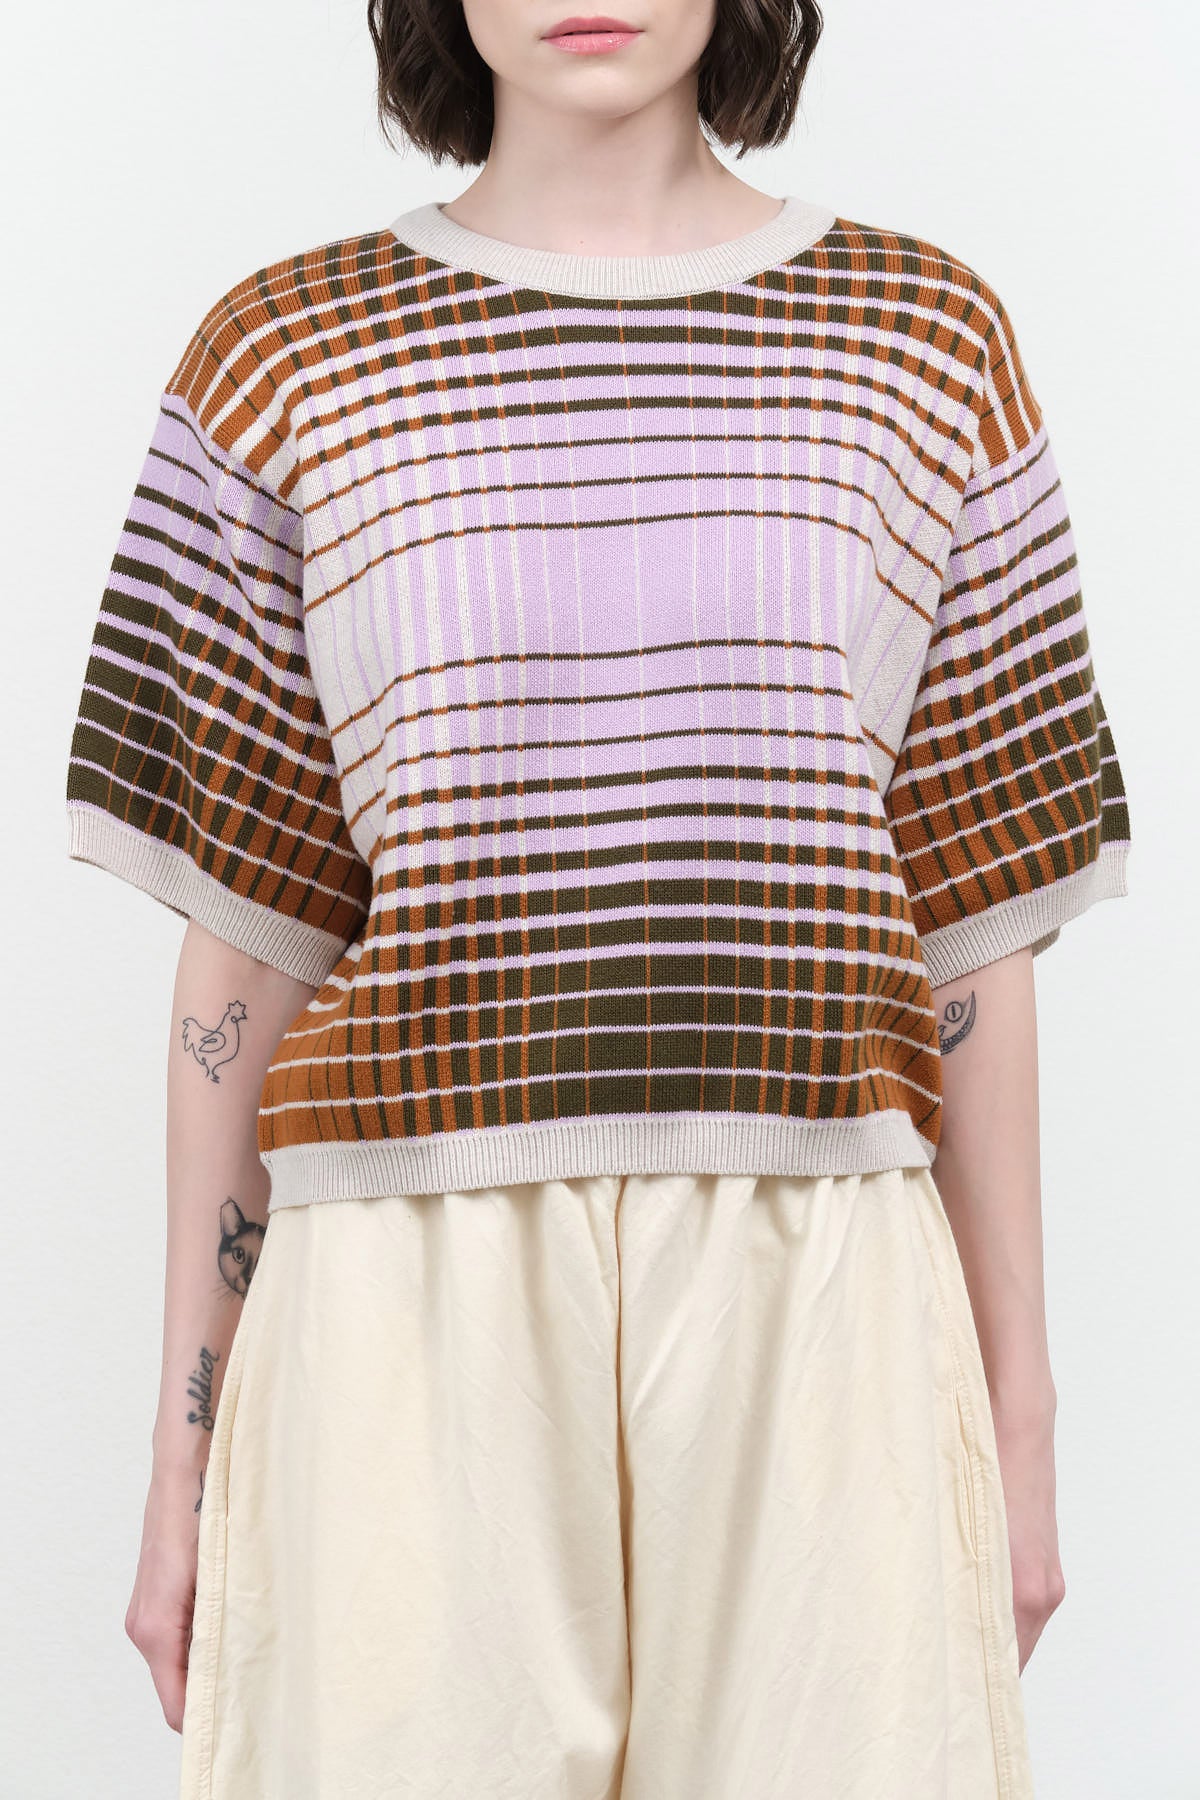 Gradient Knit Top by Kowtow